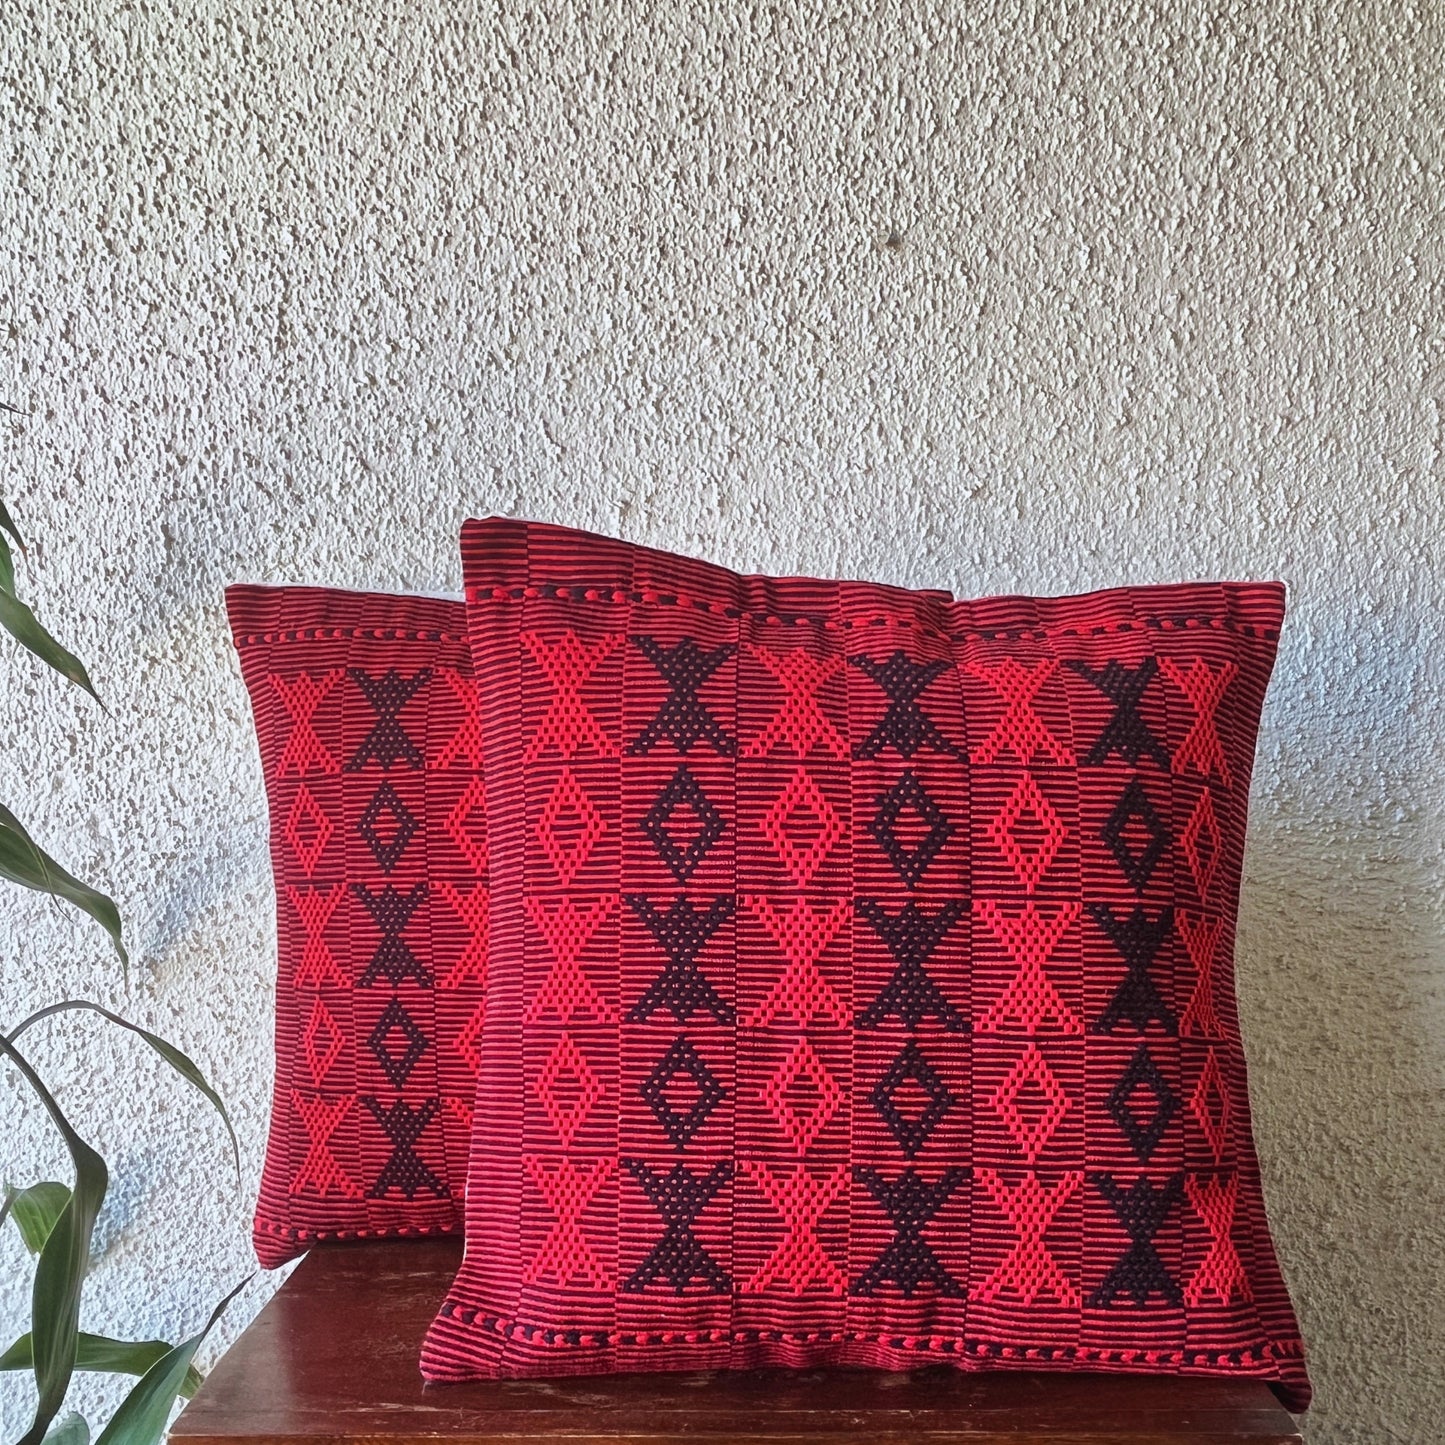 Chizami Weaves - Loin Loom Handwoven Cushion Cover Set in Red (Set of 4)